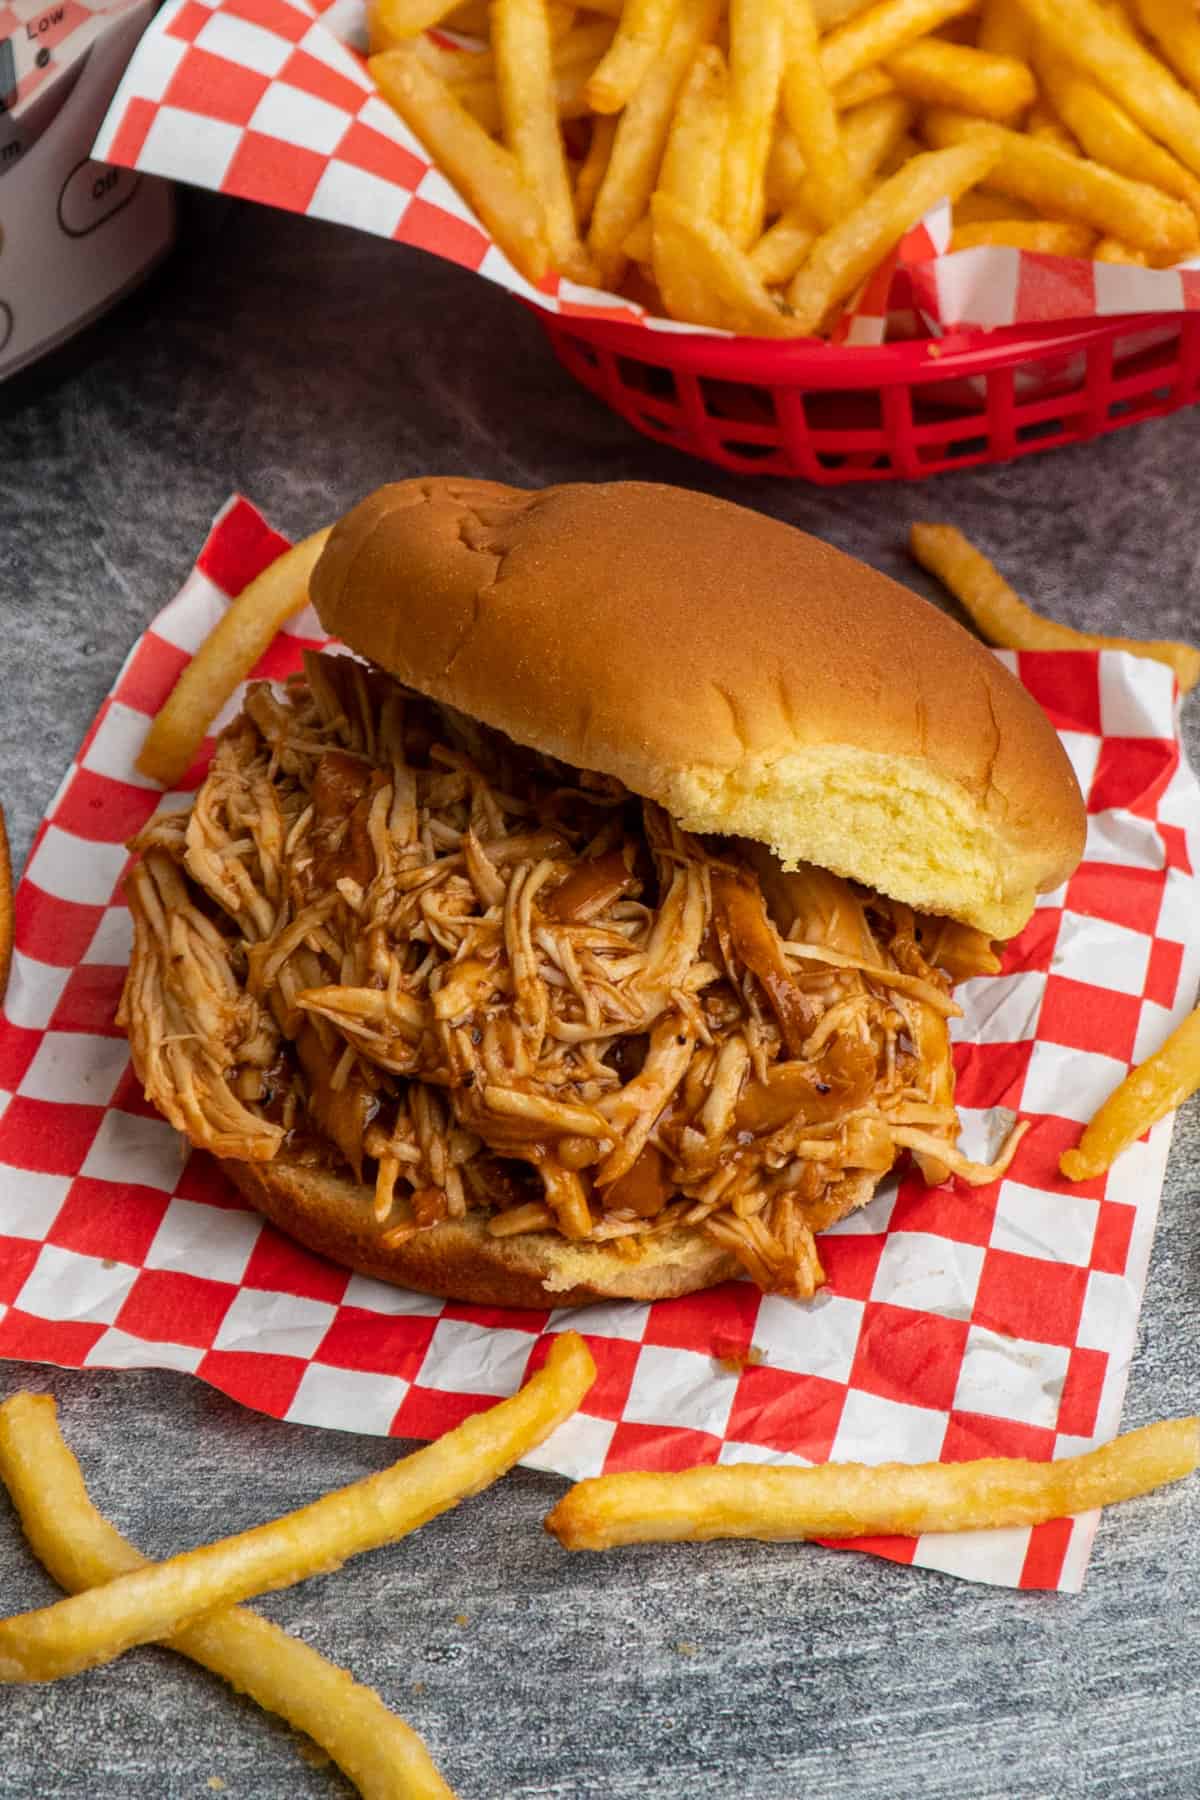 Crock Pot Dr. Pepper shredded chicken on a bun with fries in the background.